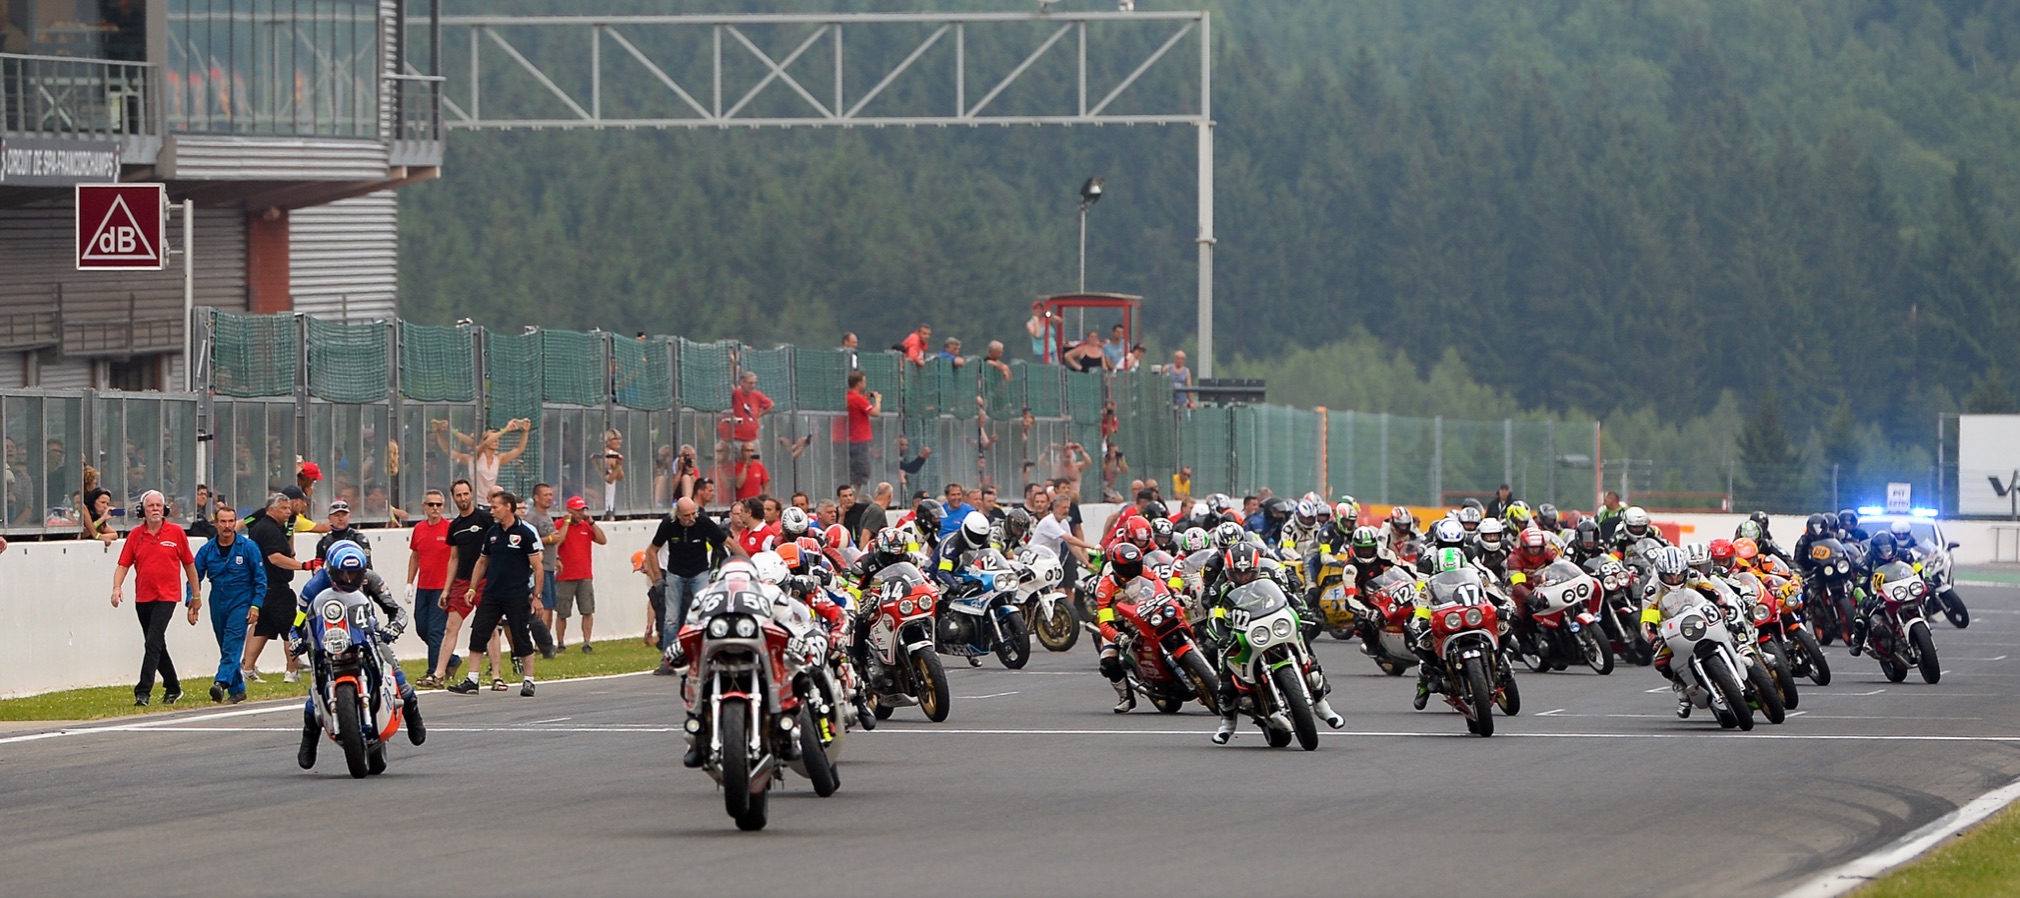 spøgelse give Fortolke The FIM Europe presents the Endurance Classic Cup 2019 - Fim Europe